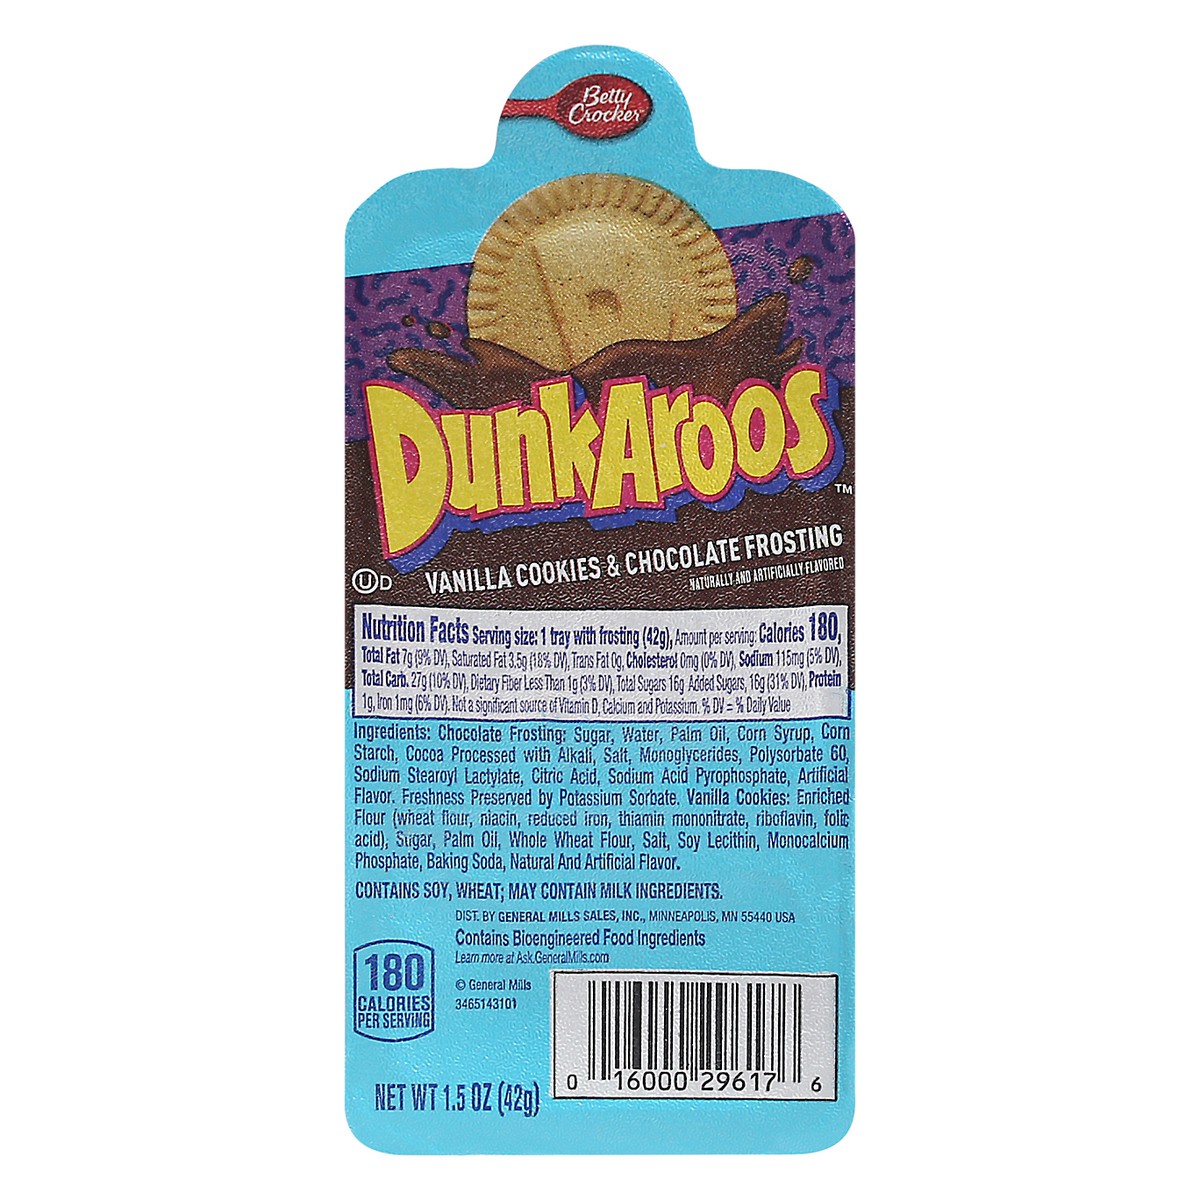 slide 11 of 11, Dunkaroos Vanilla Cookies and Chocolate Frosting, 1.5 oz, 1.5 oz